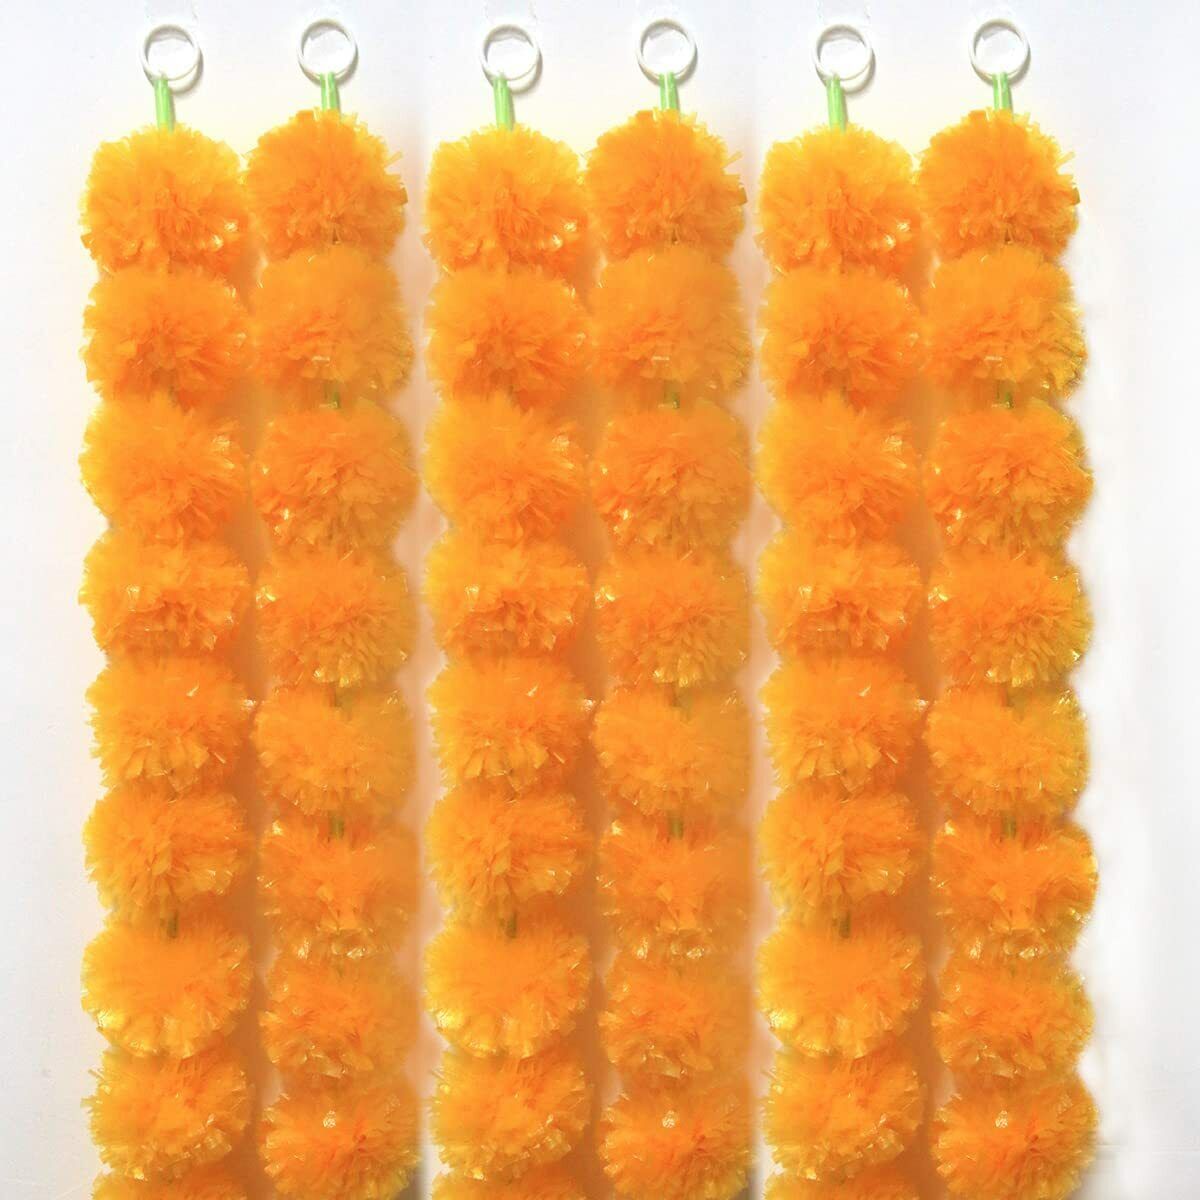 5Pack Marigold Garlands 5ft Artificial Marigold Flower Garland For Pooja/Puja TQS Does not apply - фотография #6